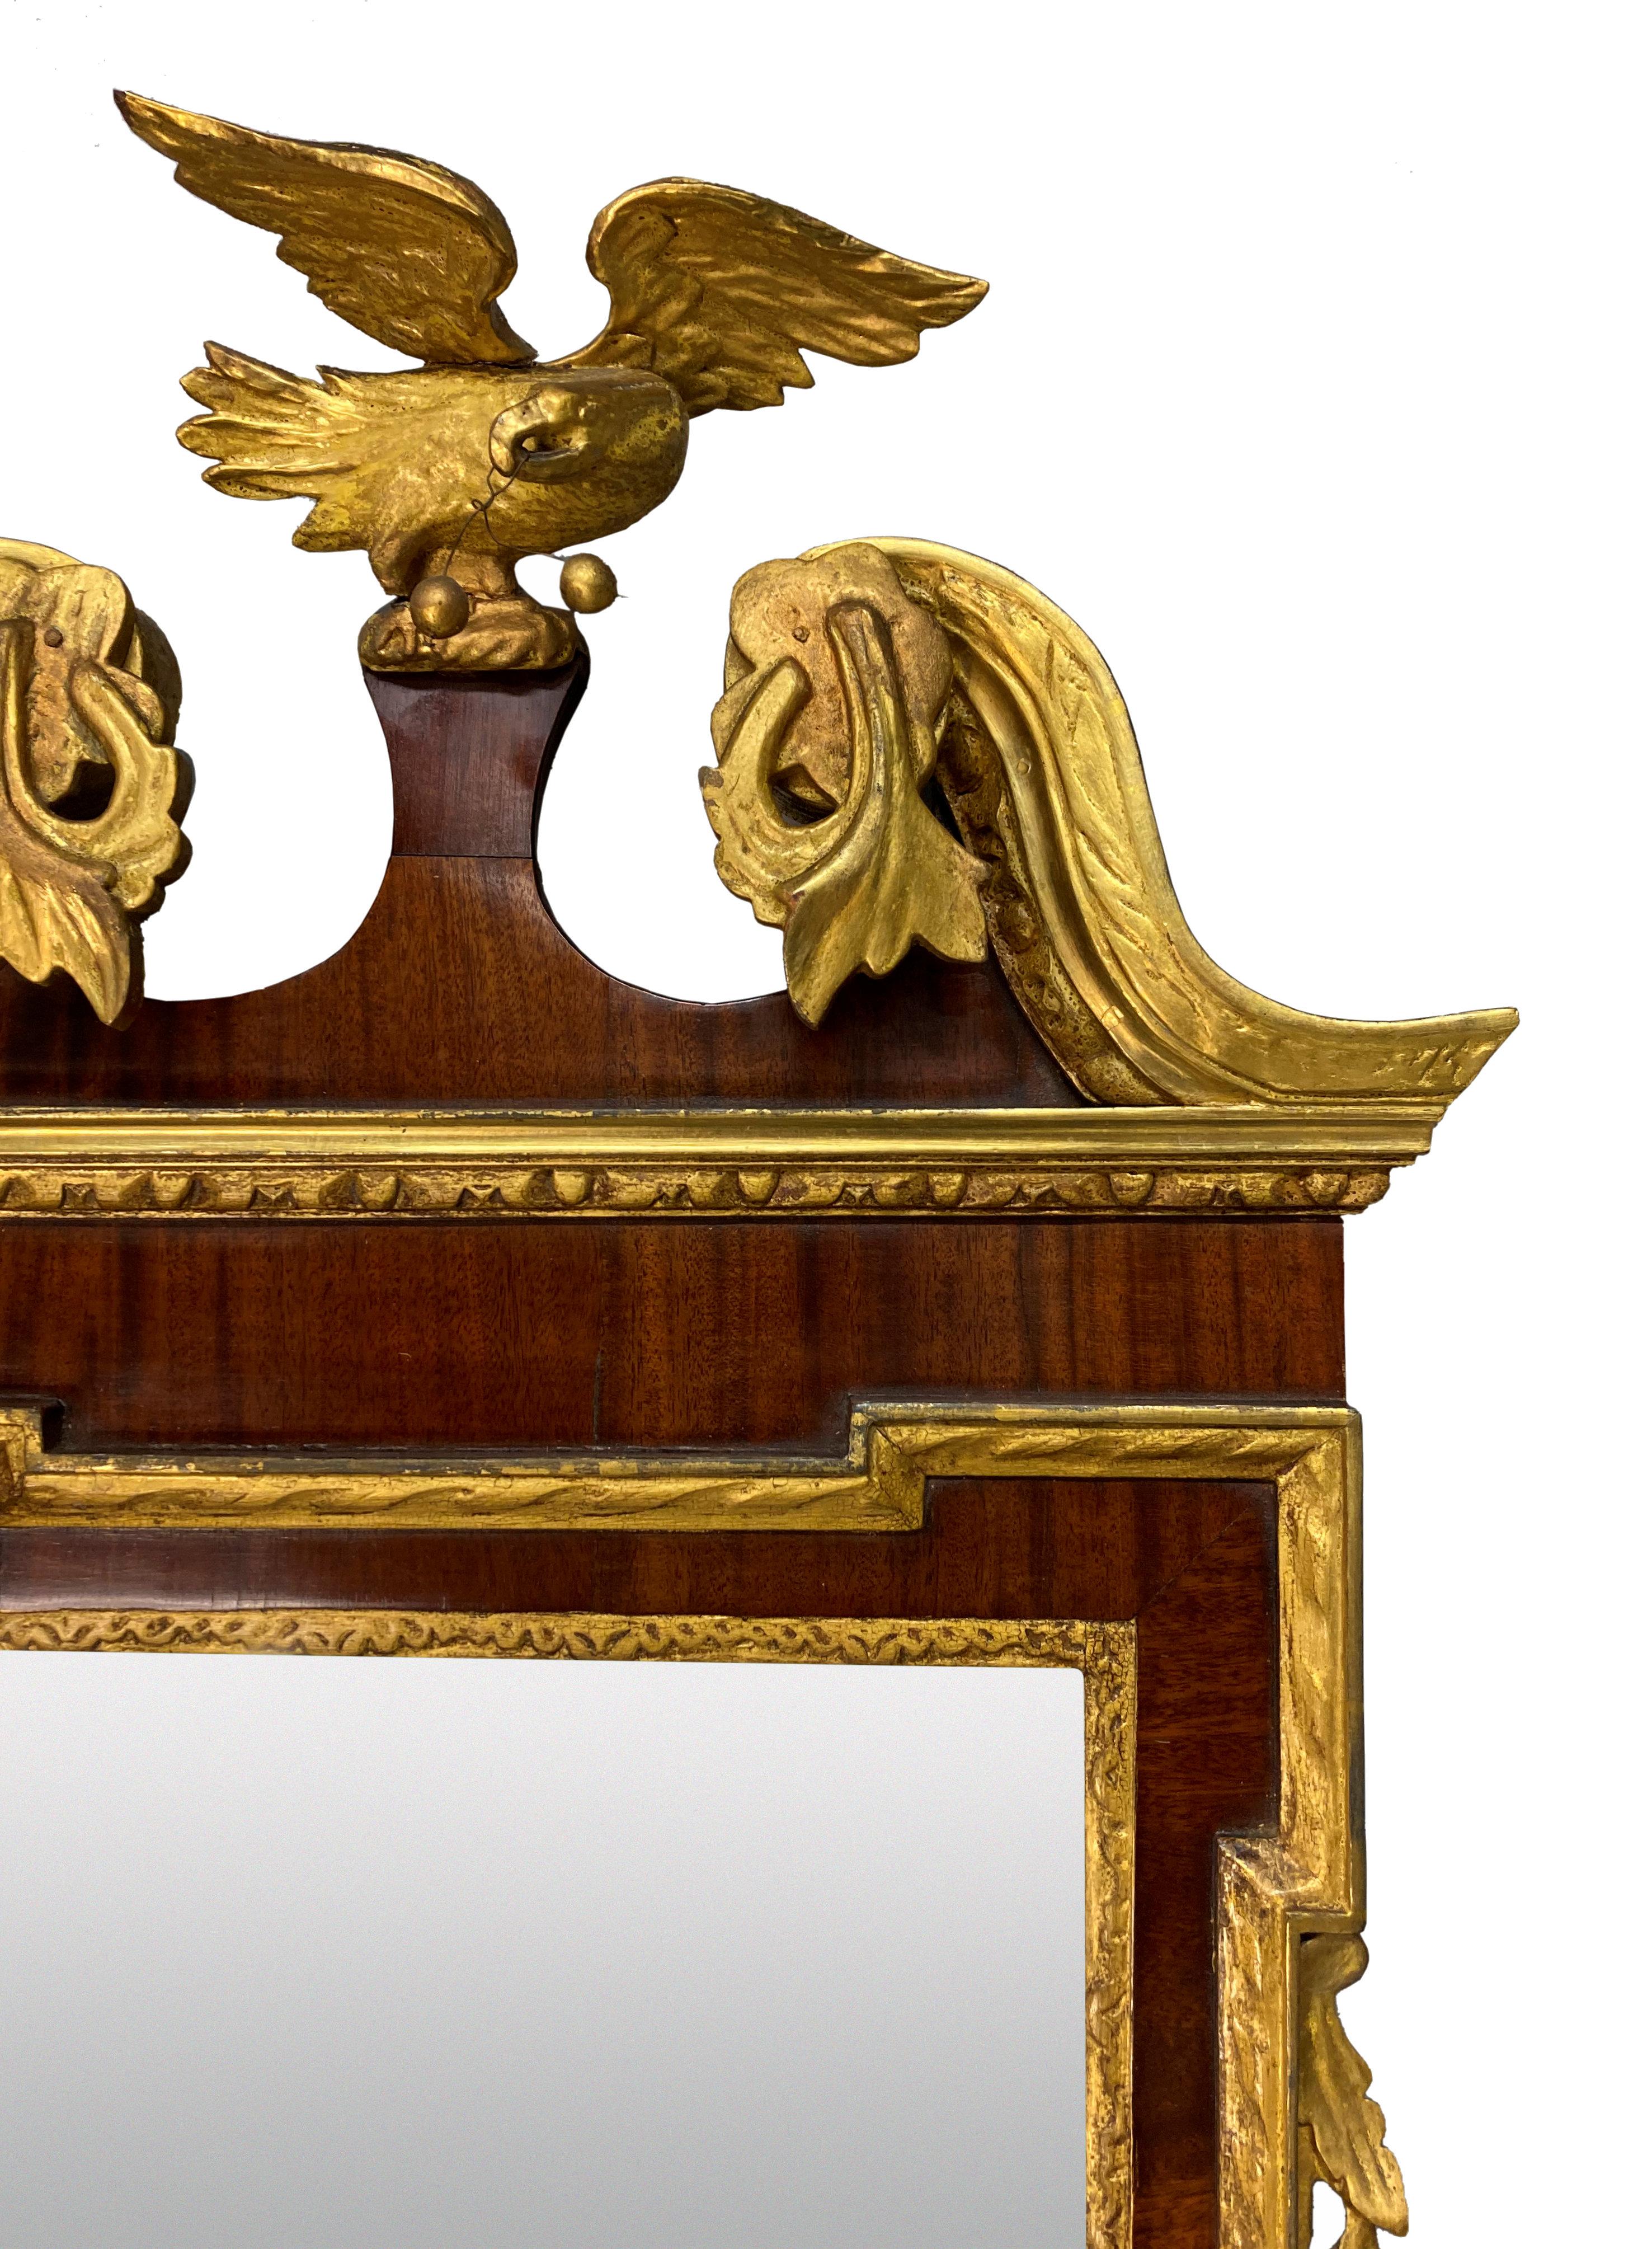 An English George II style finely carved mahogany and parcel gilt mirror. Water gilded with an architectural pediment surmounted with an eagle and with swags and foliage. The mirror plate is bevelled.